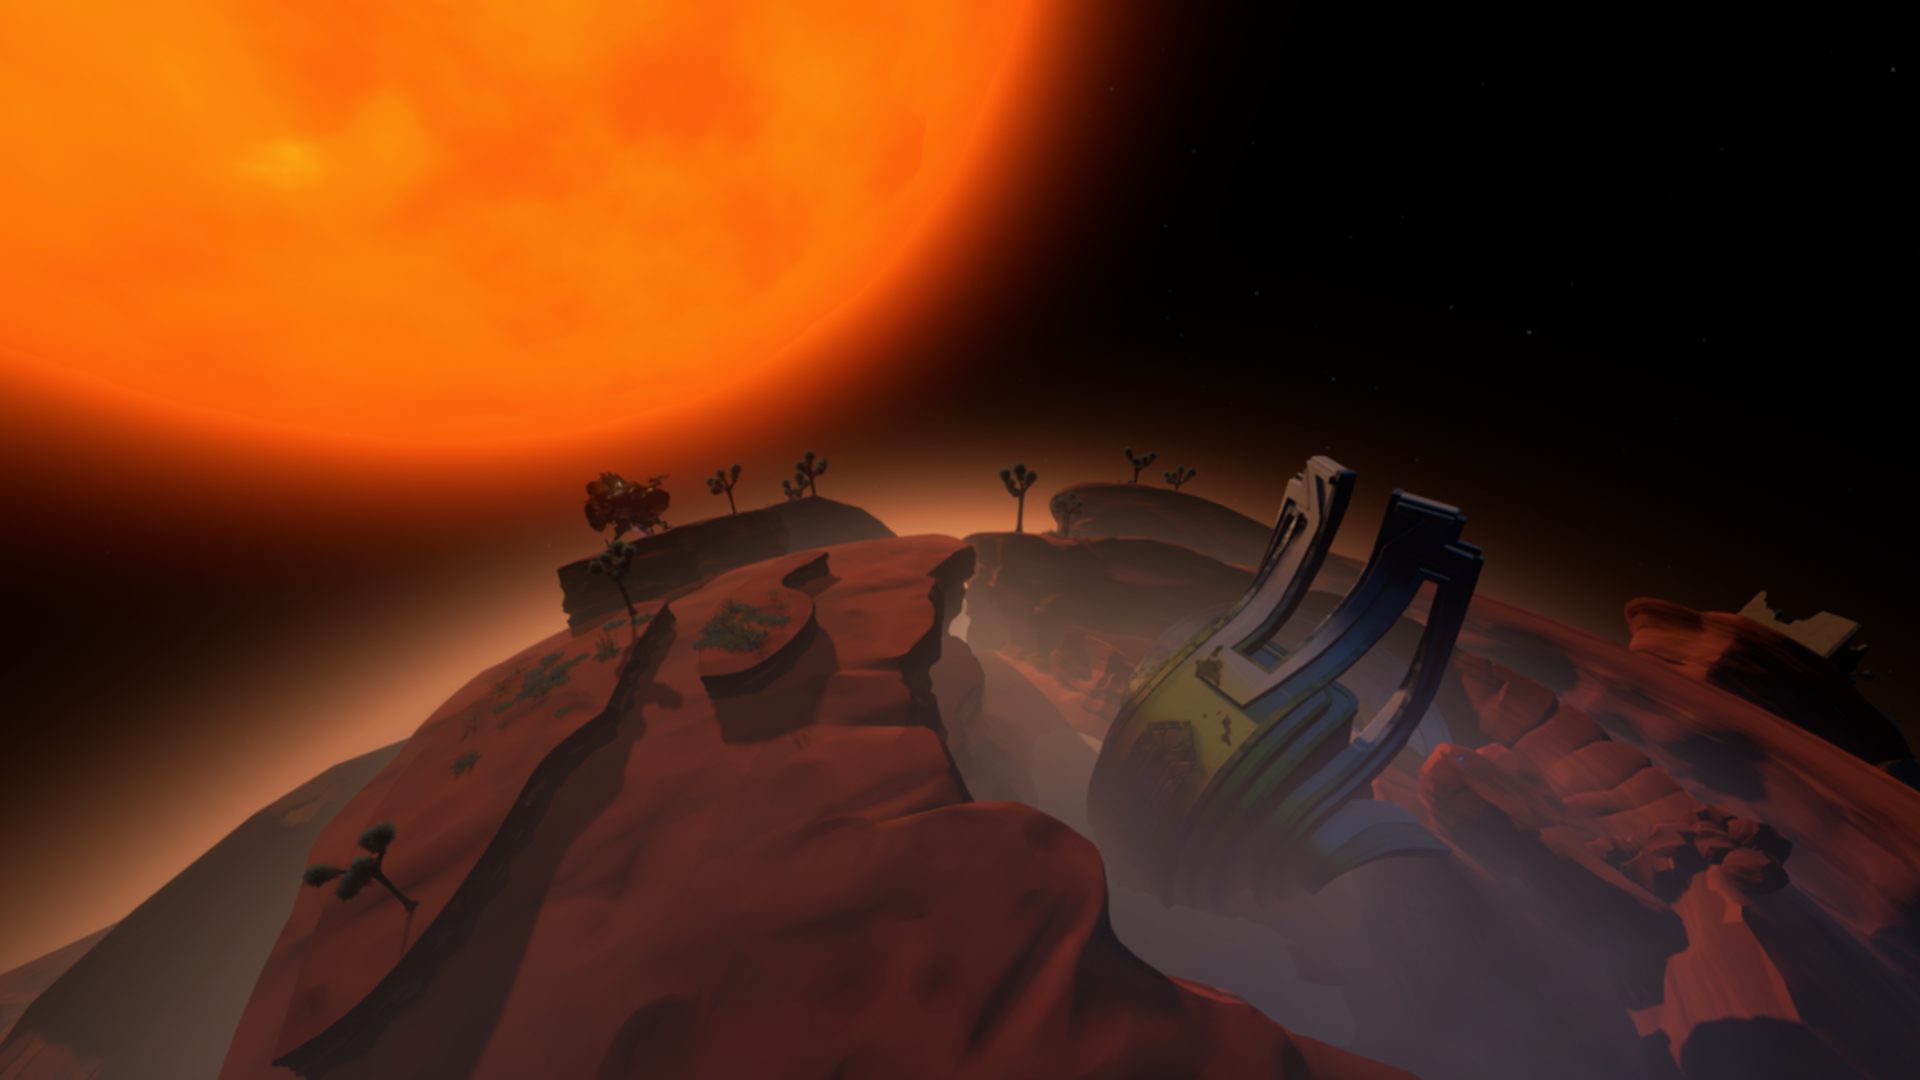 A stunning image from "Outer Wilds" showing an alien landscape under a giant, glowing orange sun. The terrain features rocky outcrops and mysterious structures, creating an atmospheric and otherworldly scene.